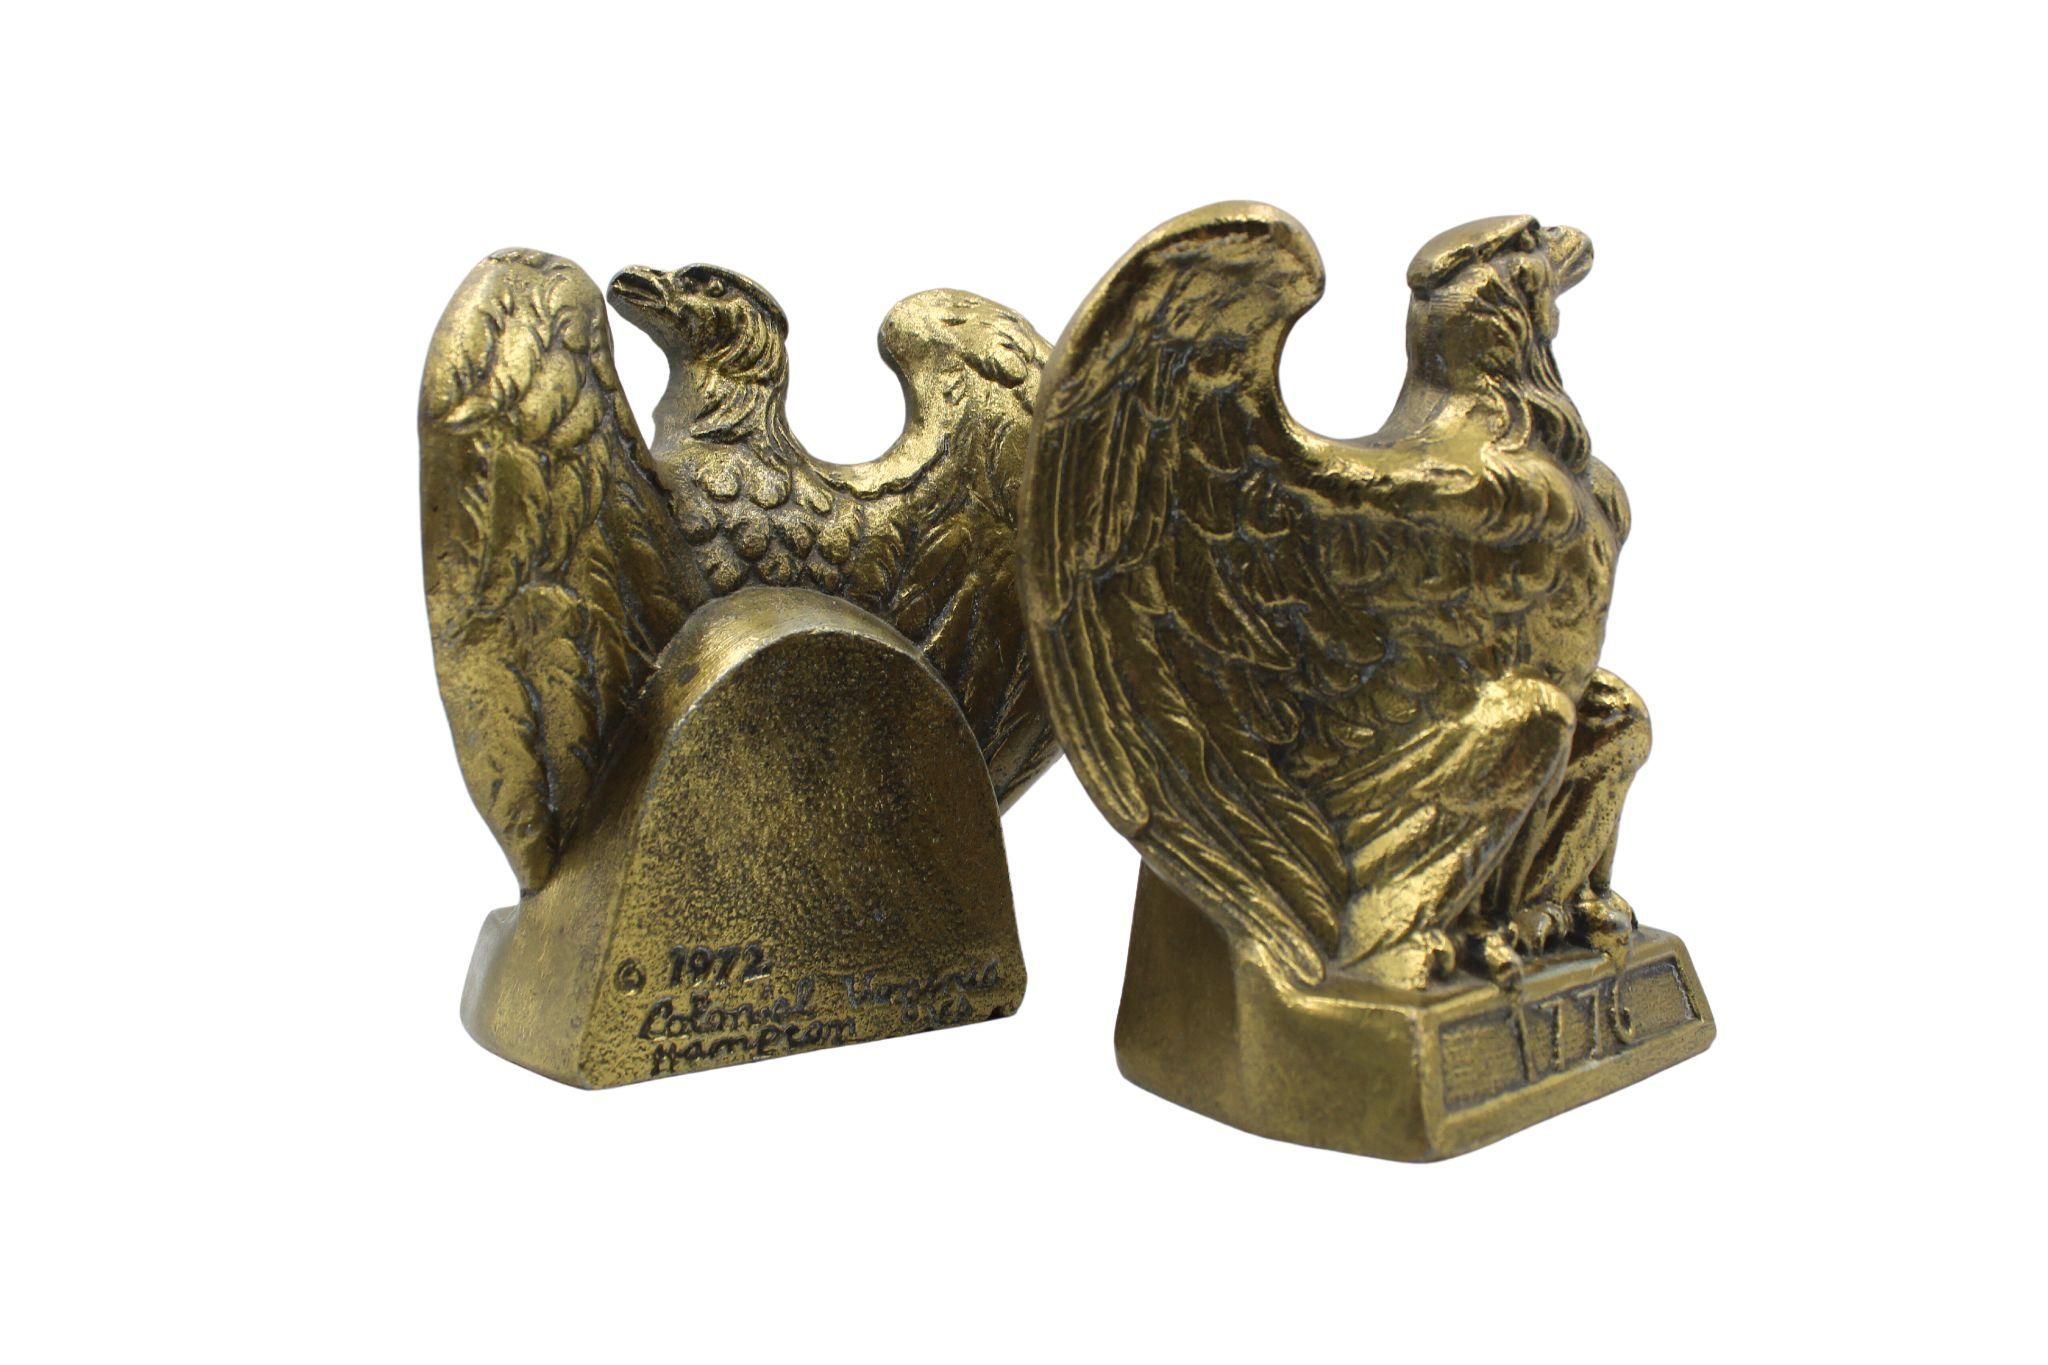 These appealing vintage brass bookends depict a spread-wing bald eagle perched on a rectangular base. The base is stamped with the date “1776.” The bookends were made by Colonial Virginia, a crafter working out of Hampton, Virginia in 1972. The